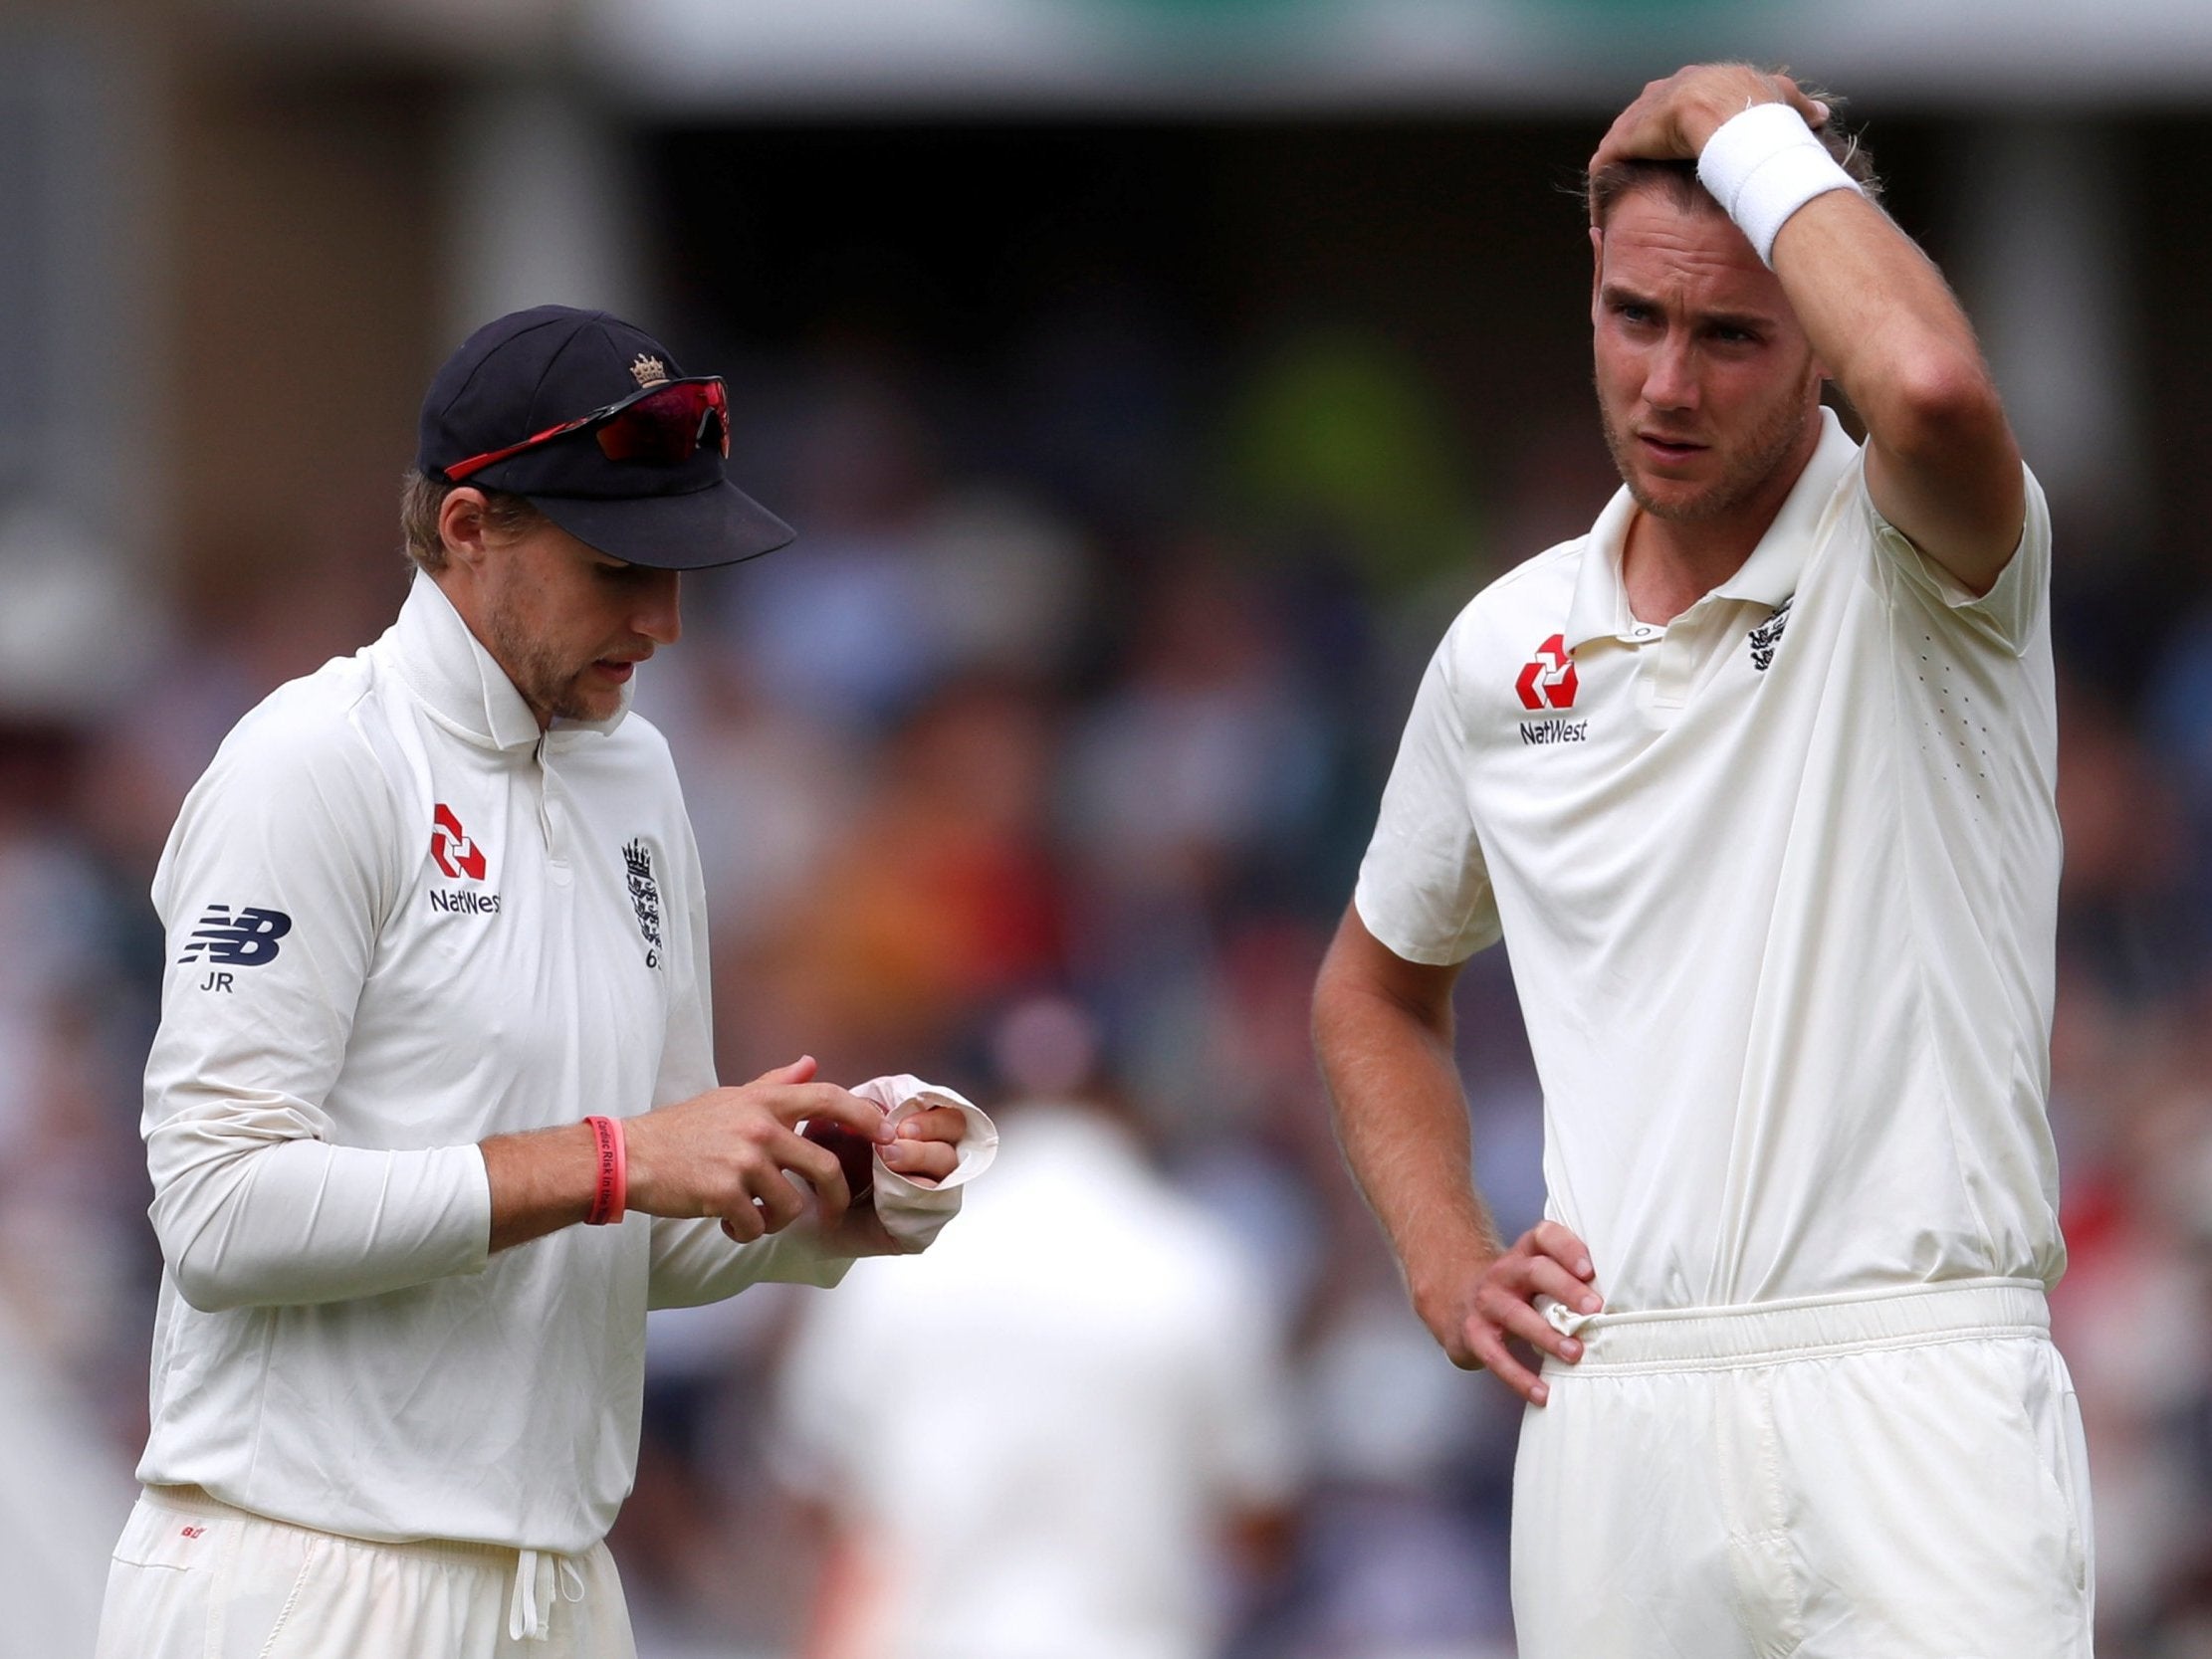 England were left frustrated after failing to make the most of the early conditions on day one